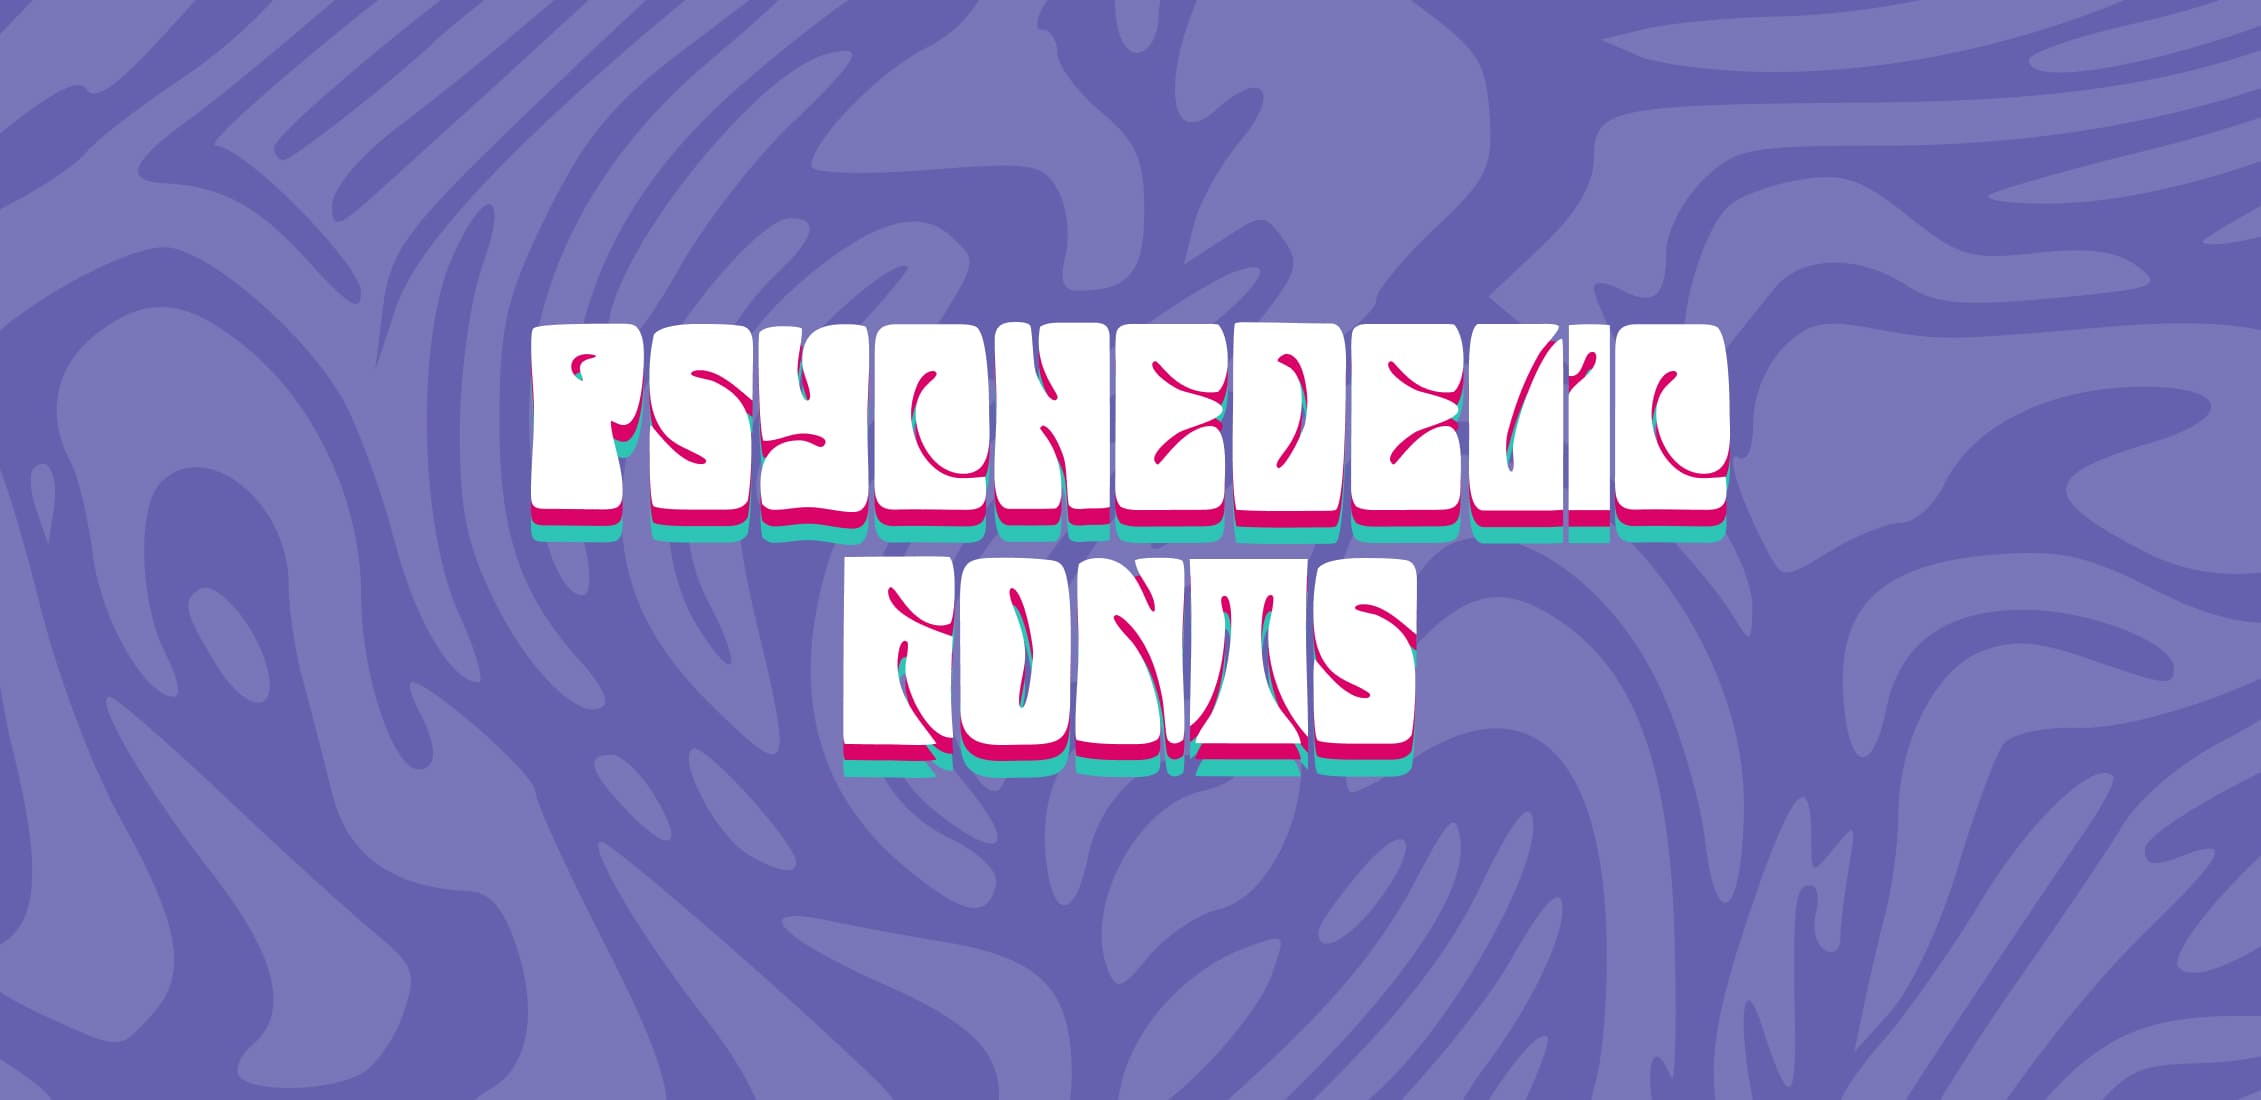 31 best psychedelic fonts for printing websites logos and applications featured image 191.